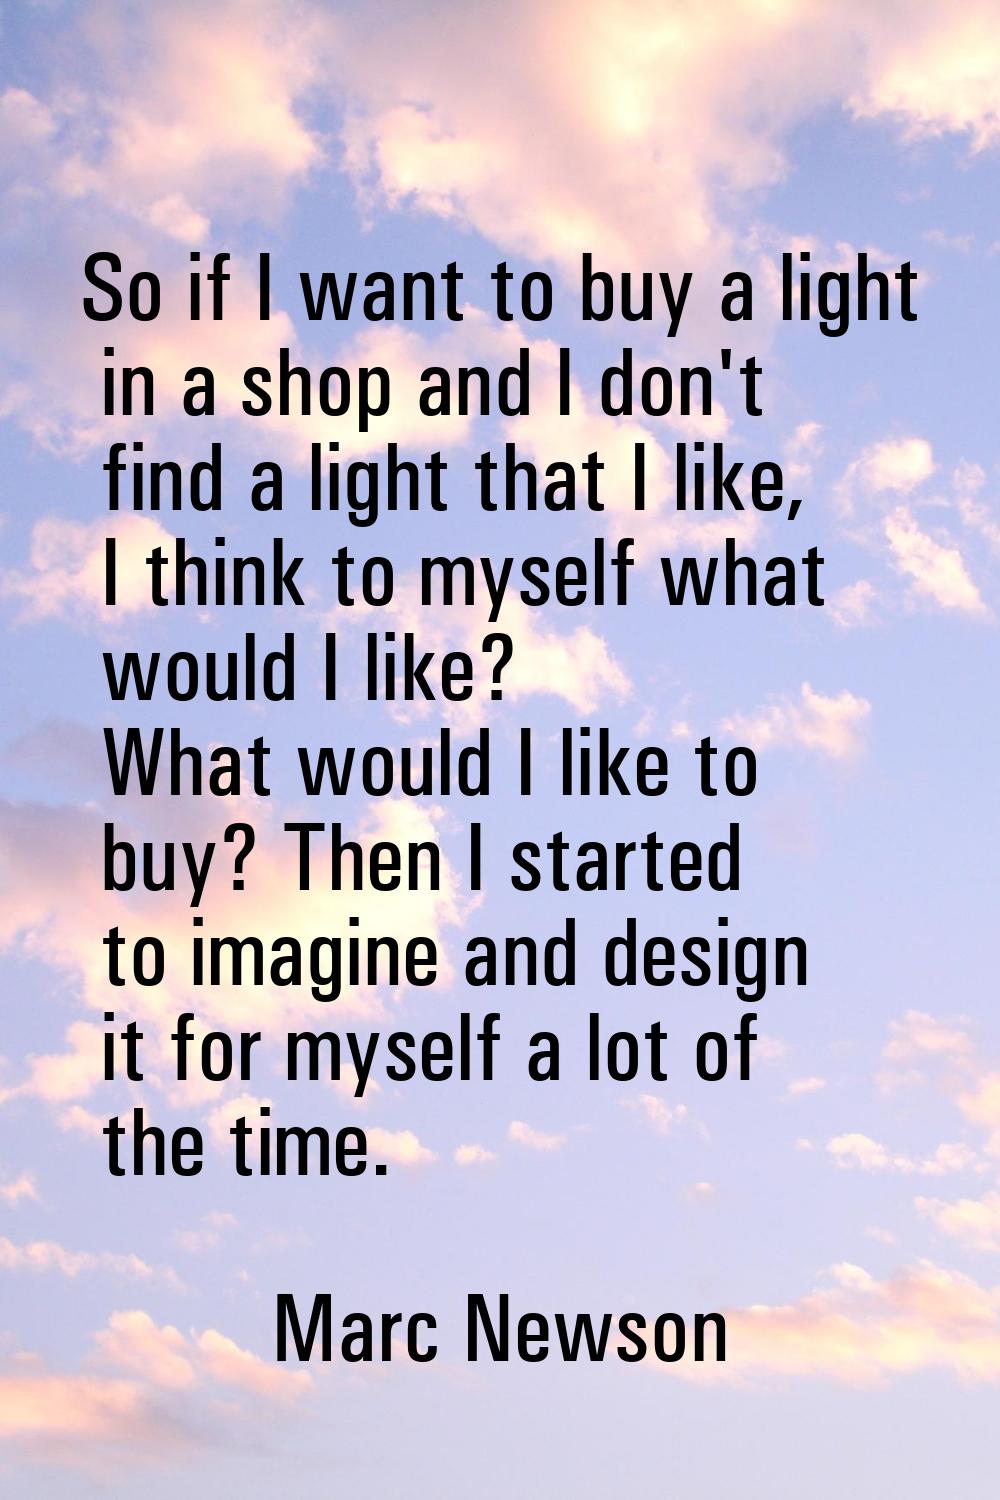 So if I want to buy a light in a shop and I don't find a light that I like, I think to myself what 